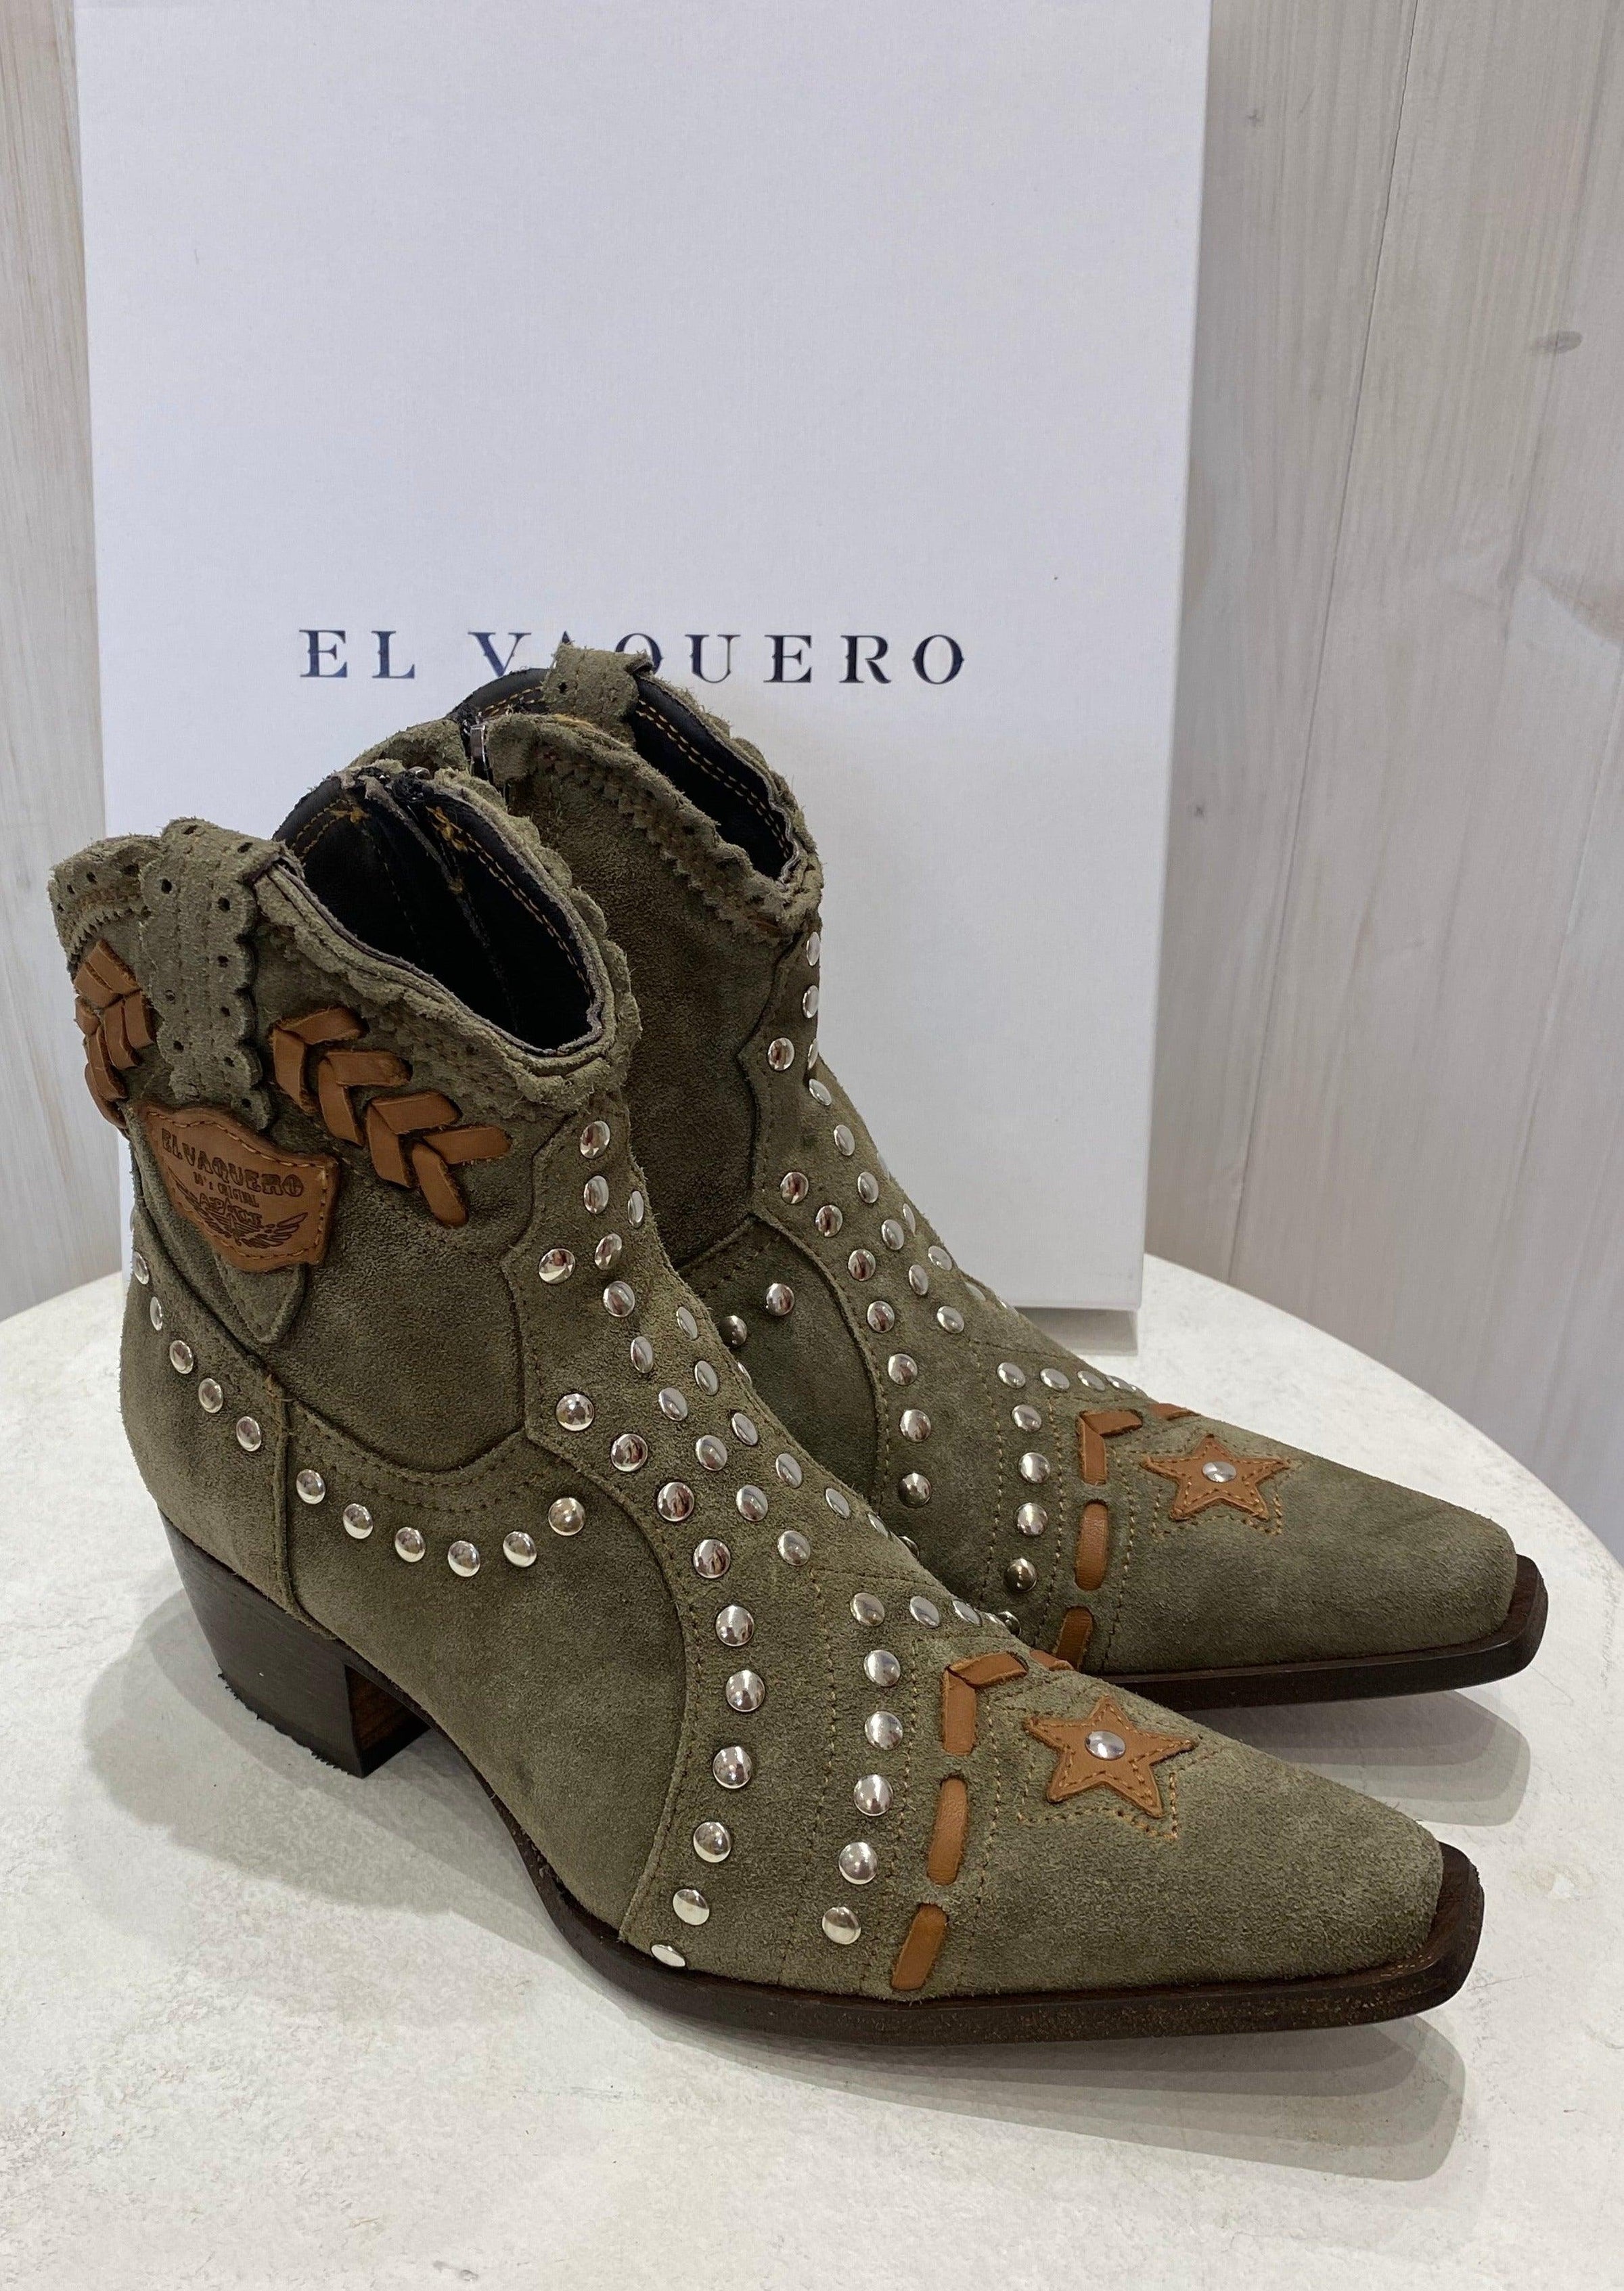 El Vaquero - Clyde Boots in Silverstone Truffle - OutDazl